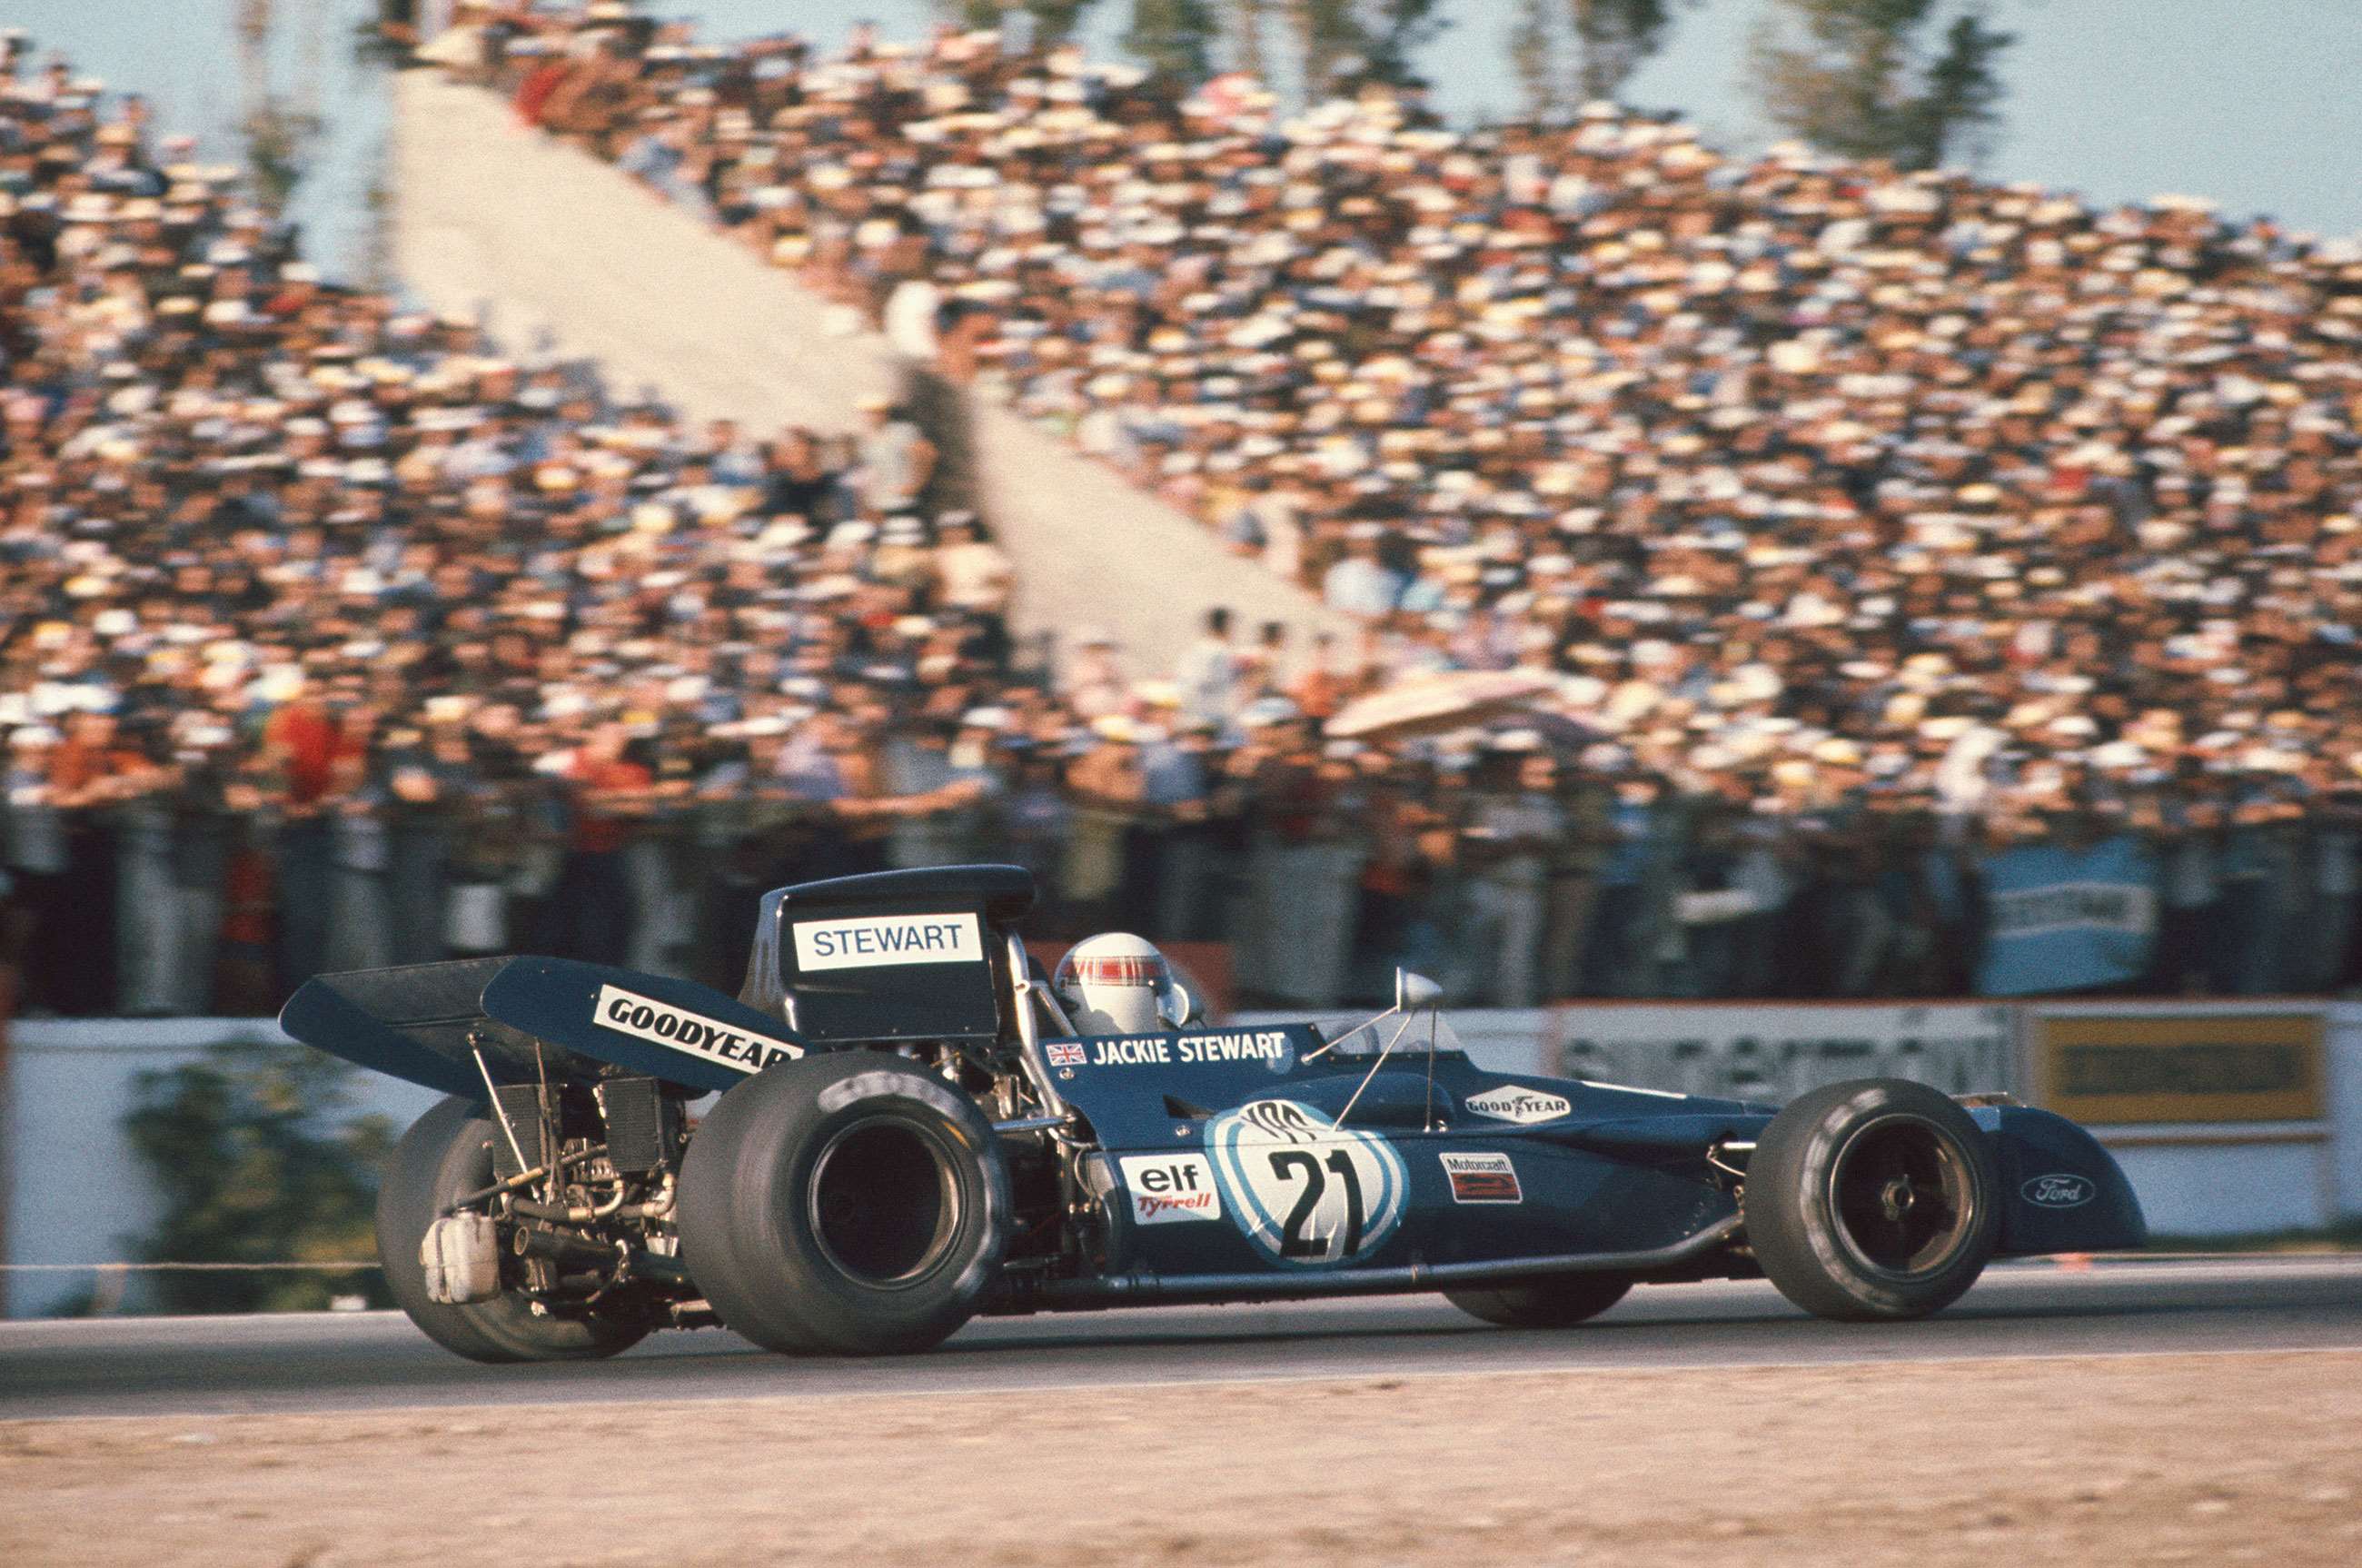 january-f1-races-buenos-aires-argentina-1972-jackie-stewart-tyrrell-003-ford-lat-mi-goodwood-11012021.jpg